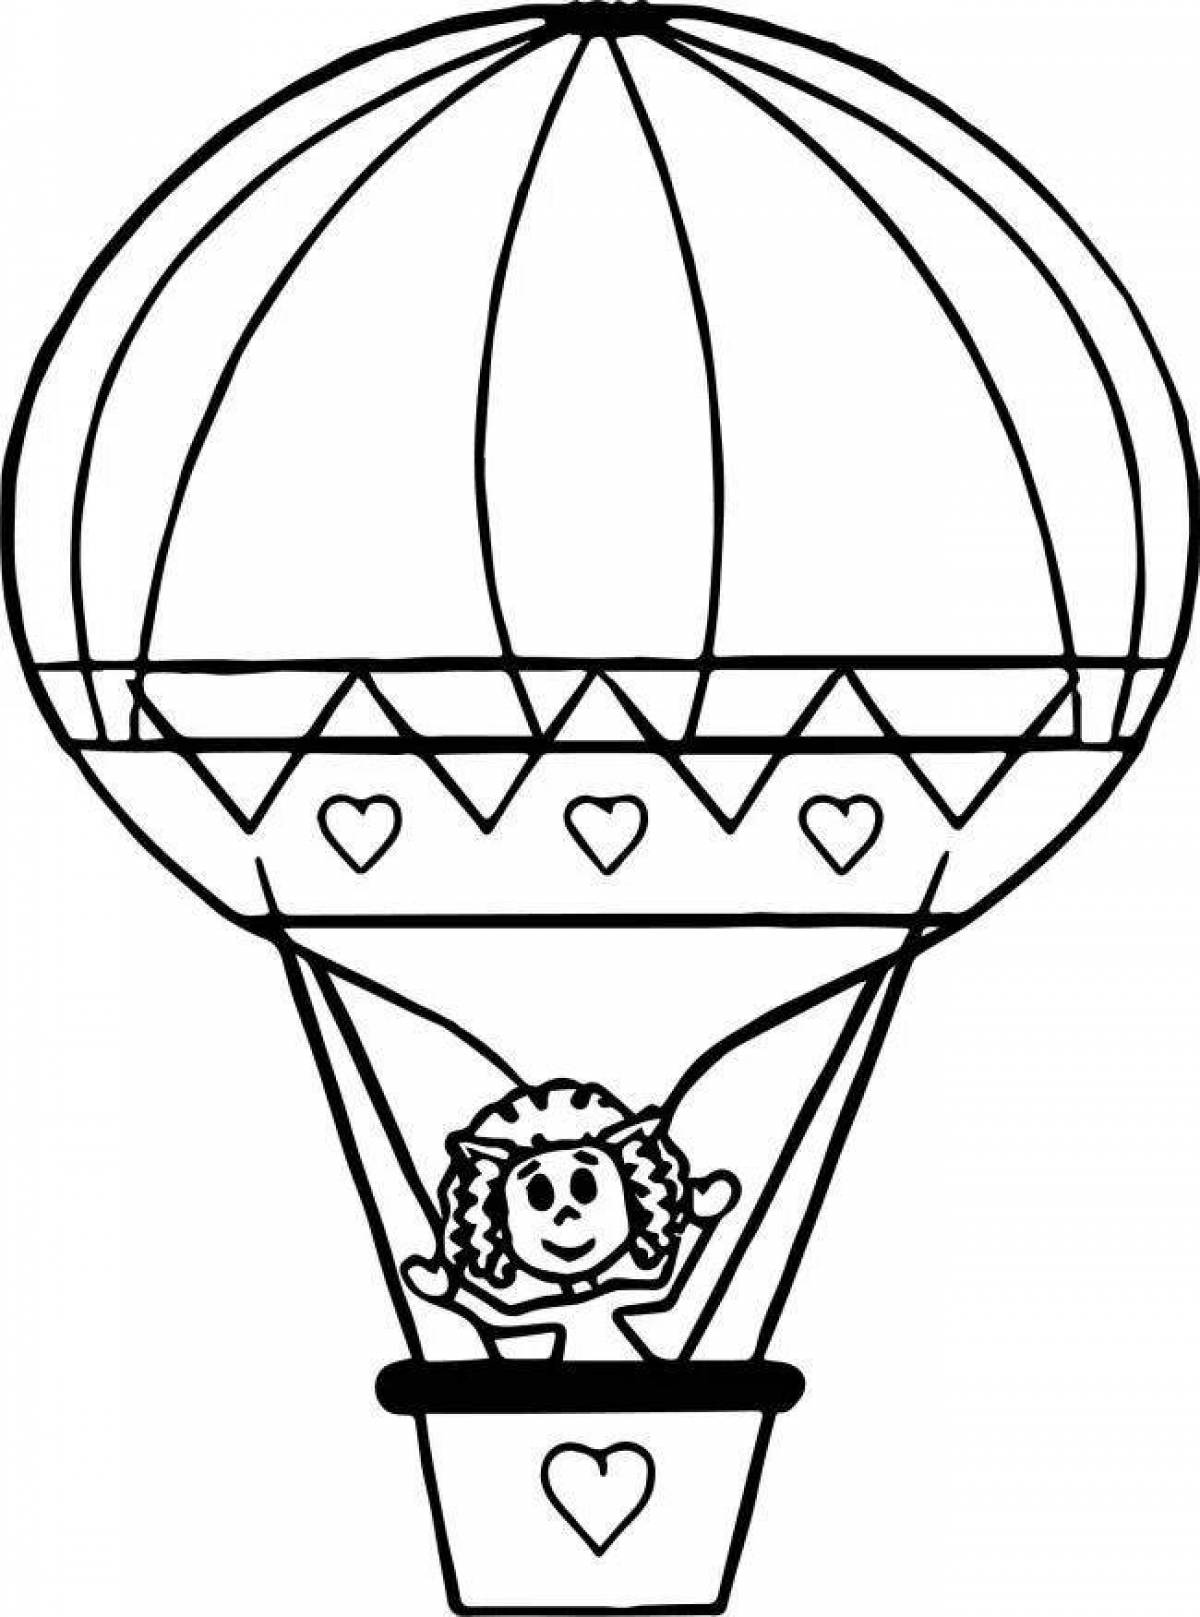 Children's balloon coloring page with a basket